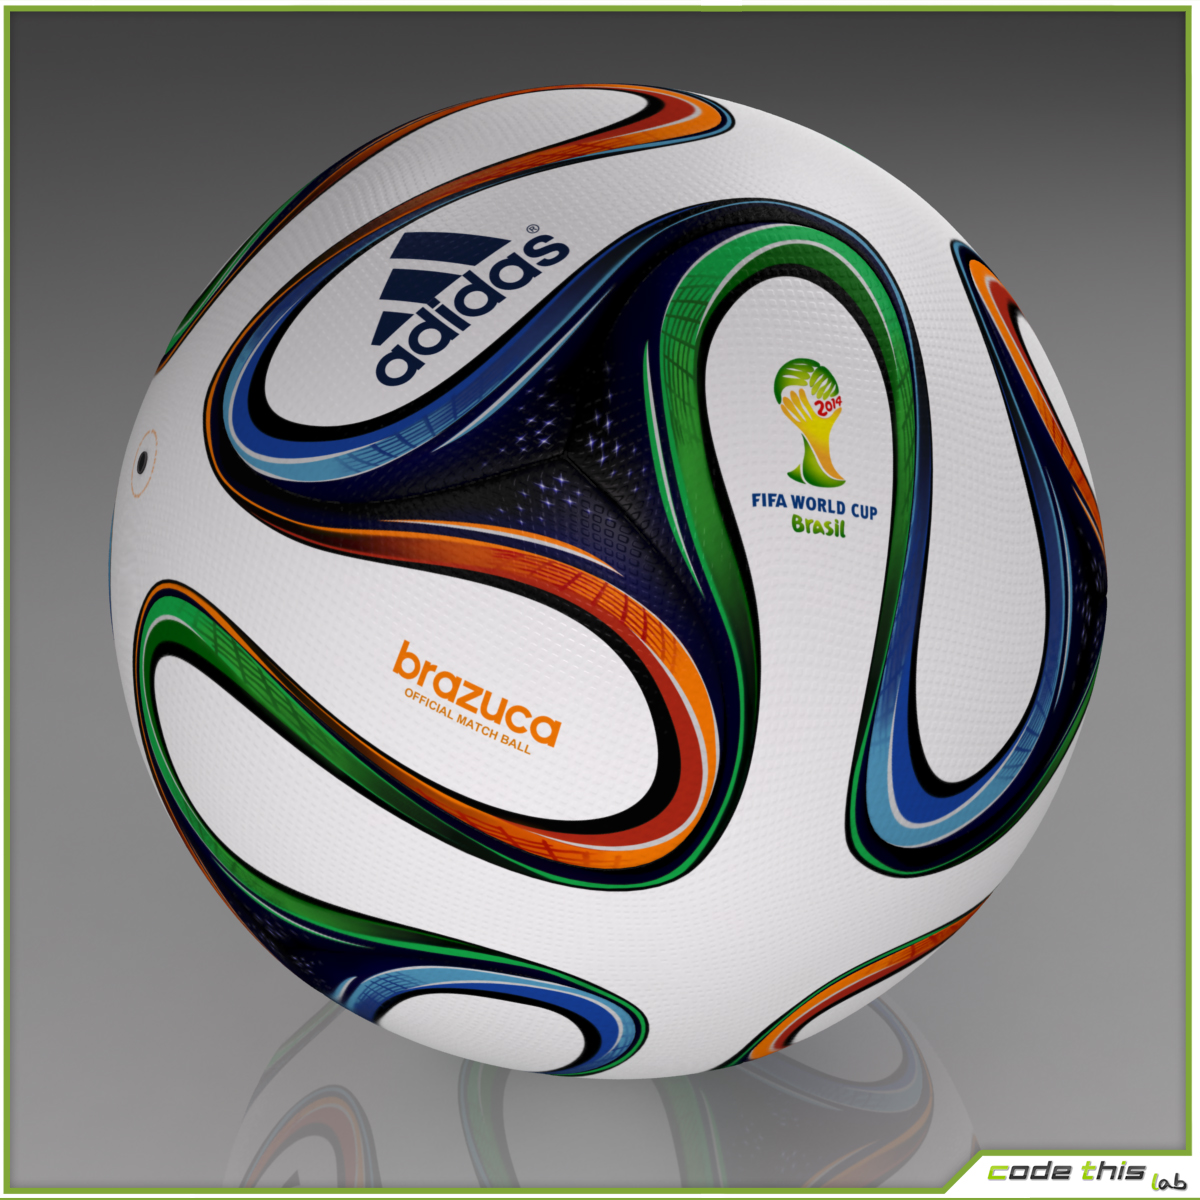 10 things to know about Brazuca. Official football for FIFA World